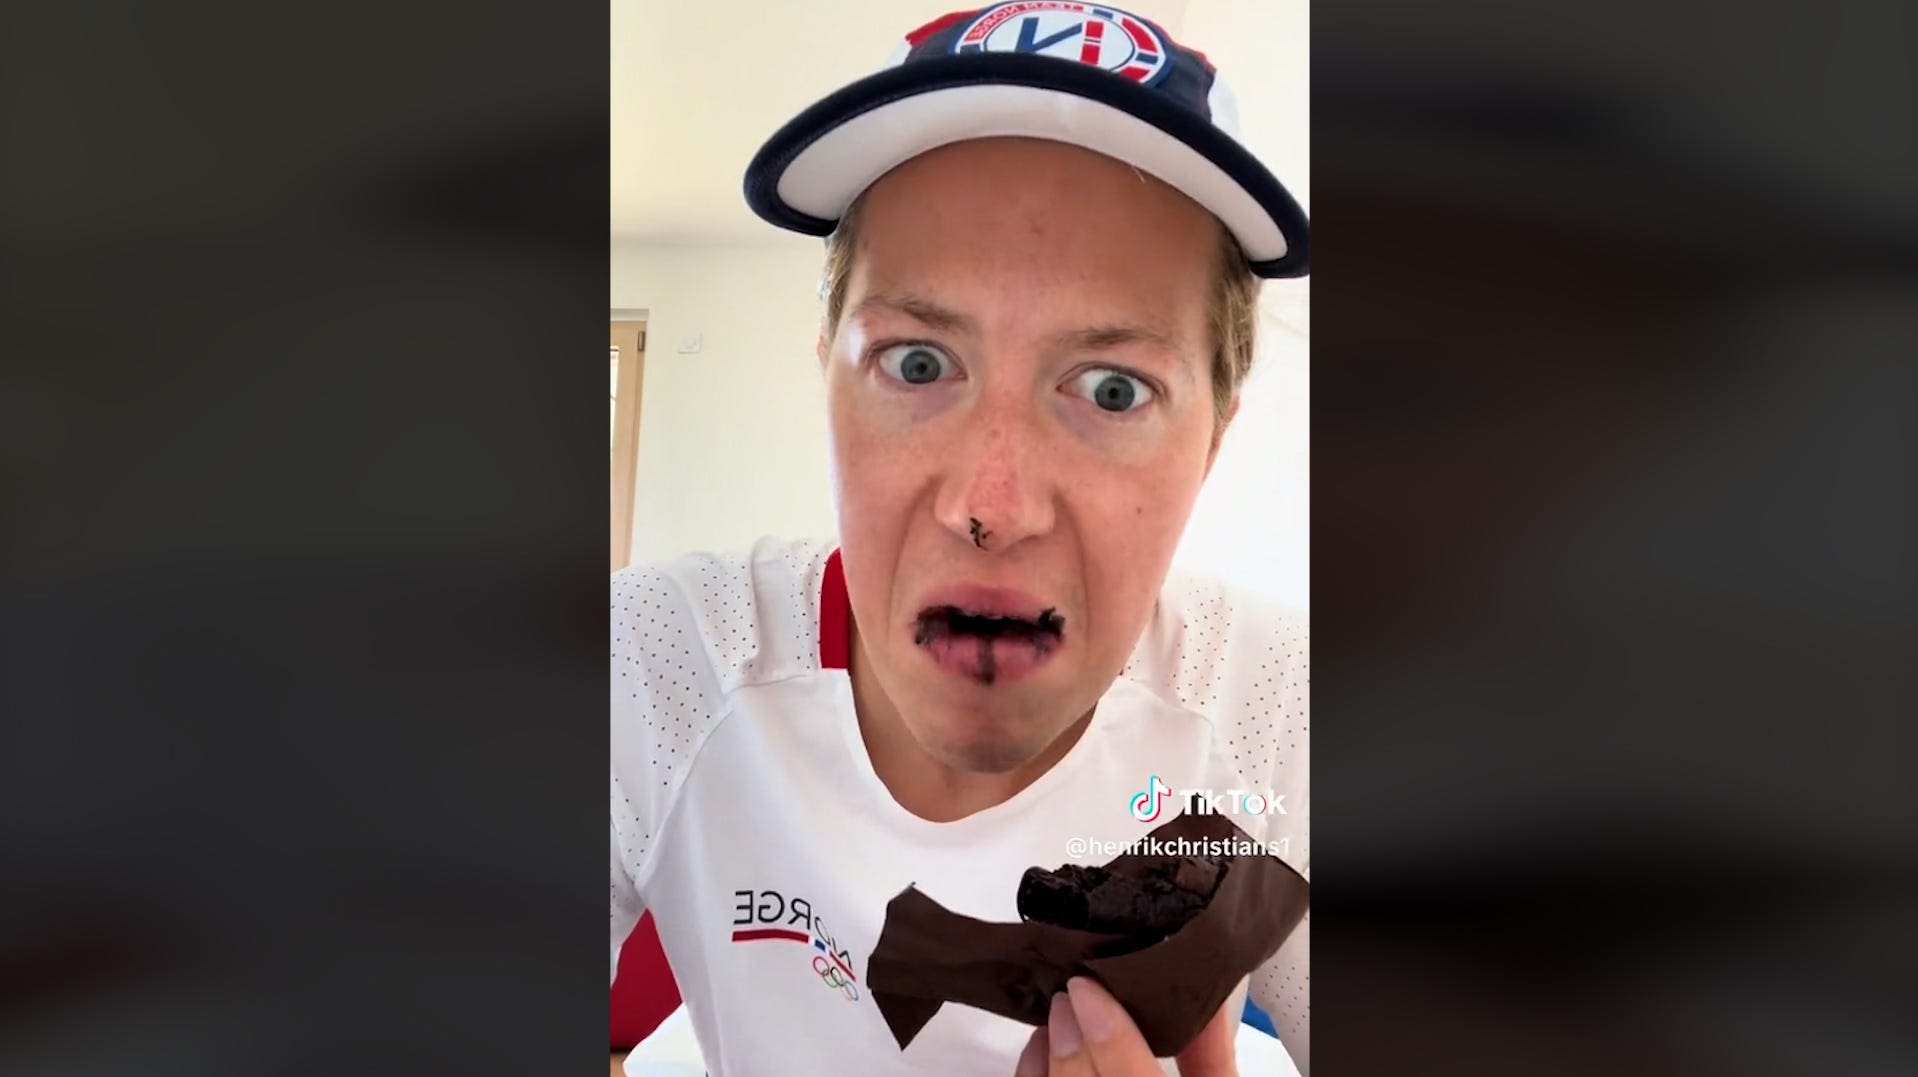 Meet the muffin man: Olympic Village's chocolate muffins are world famous thanks to this swimmer